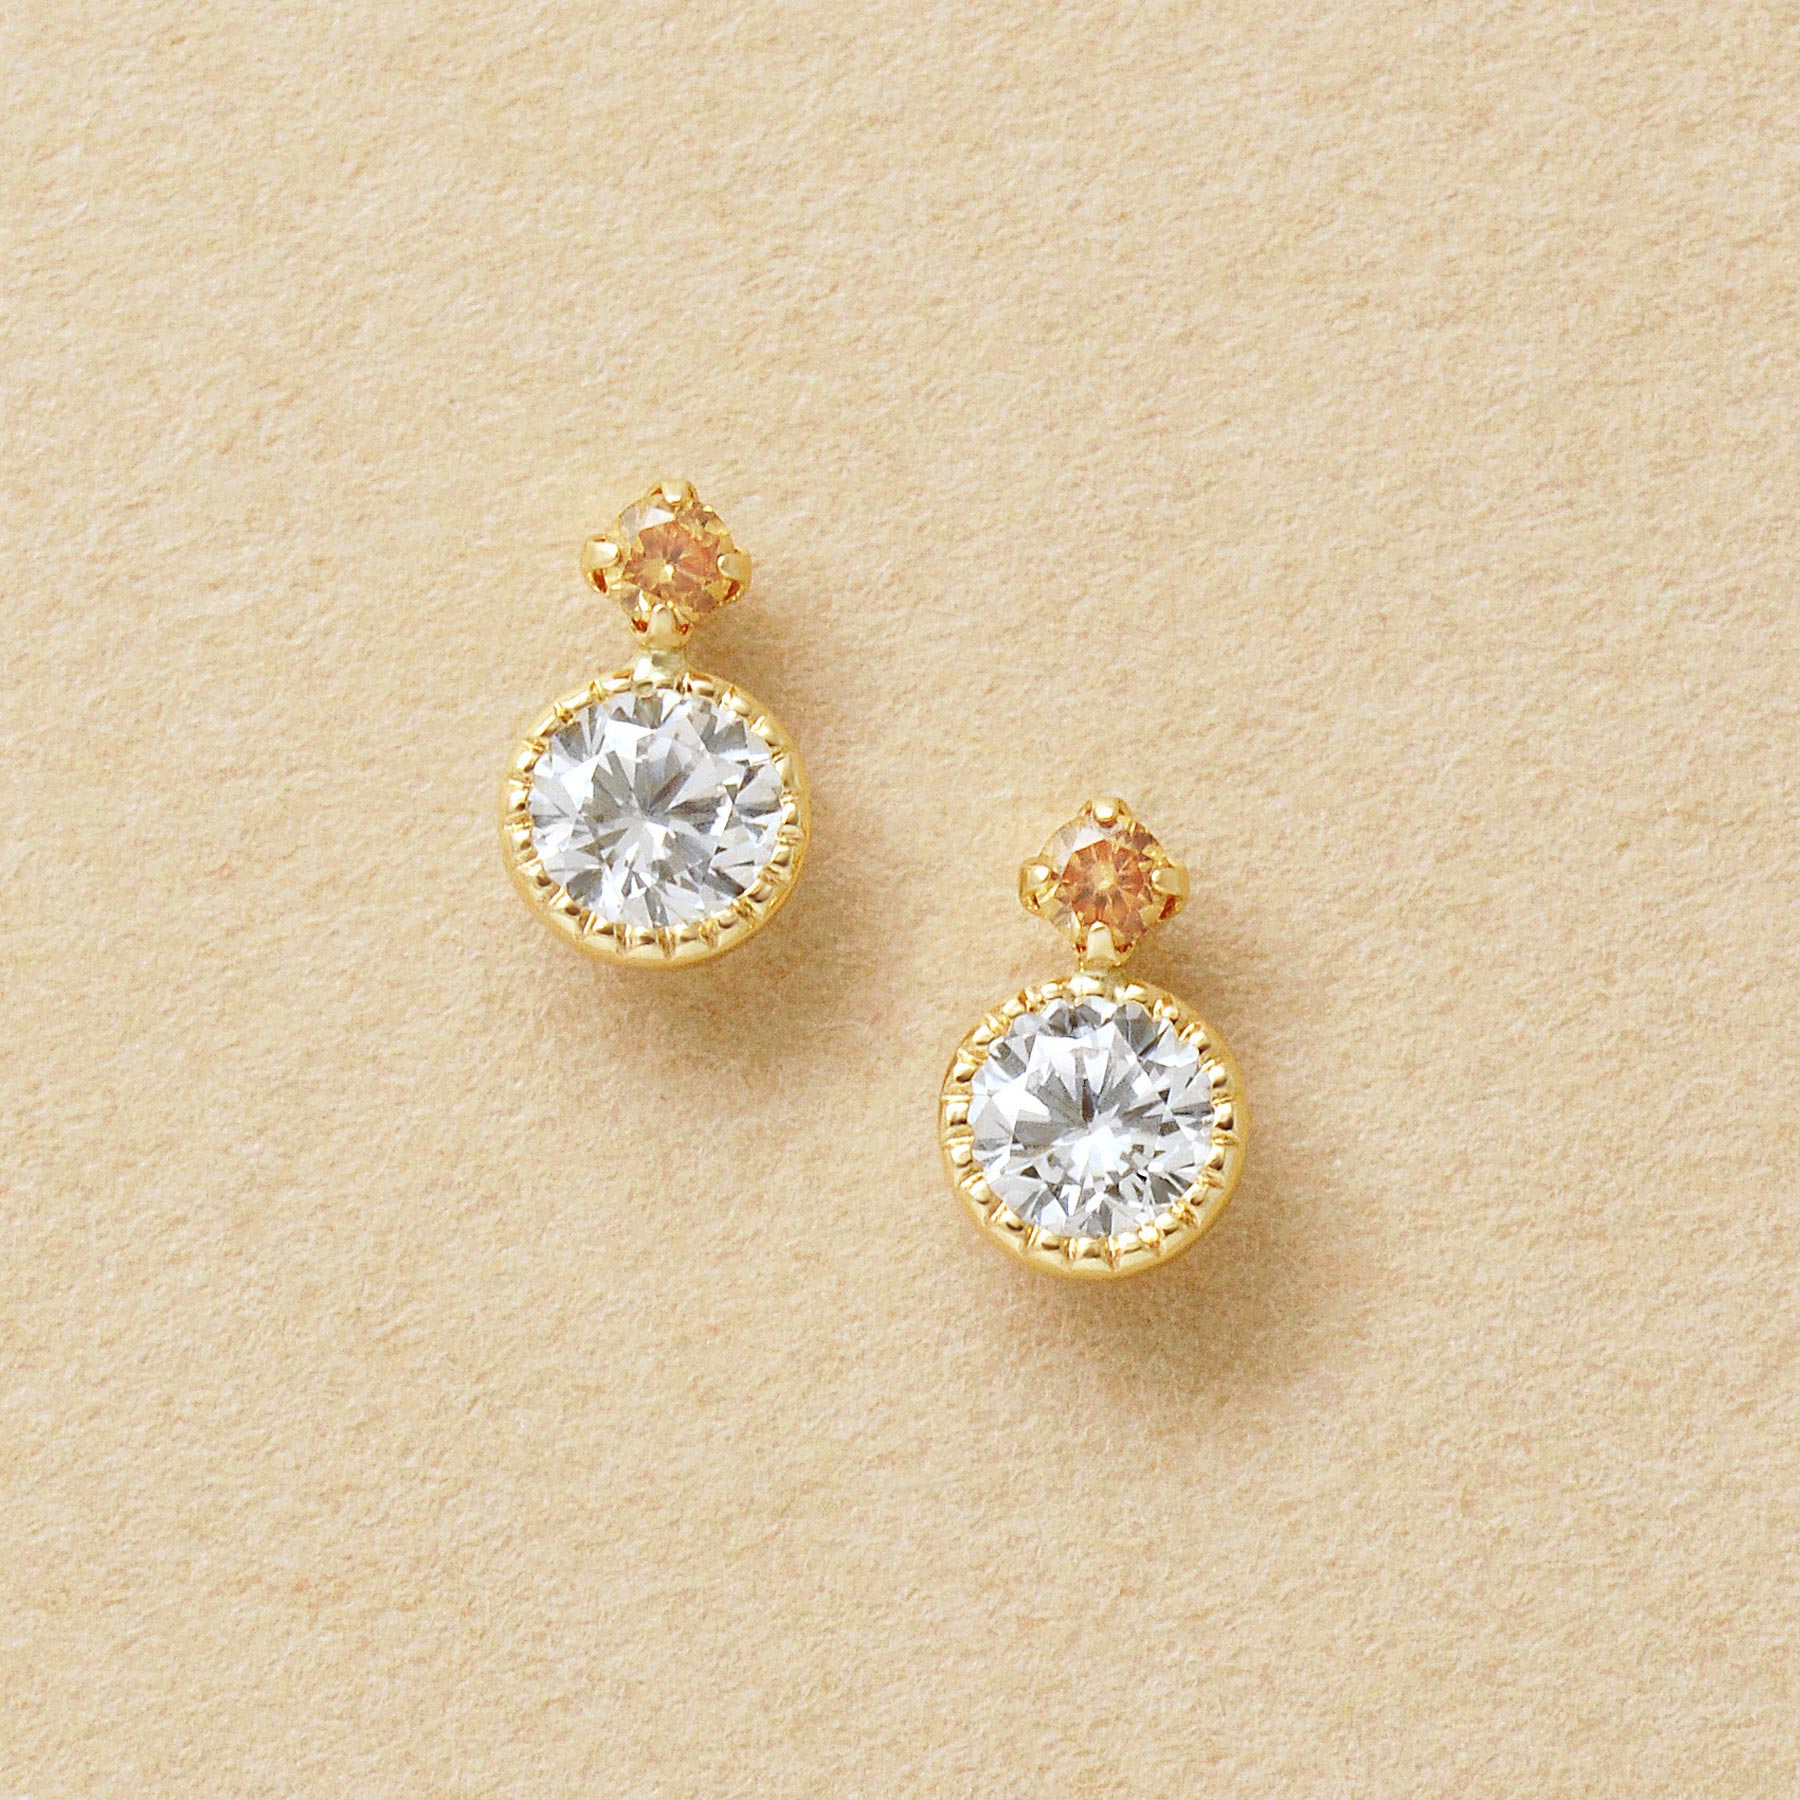 10K Champagne Color Circle Stud Earrings (Yellow Gold) - Product Image